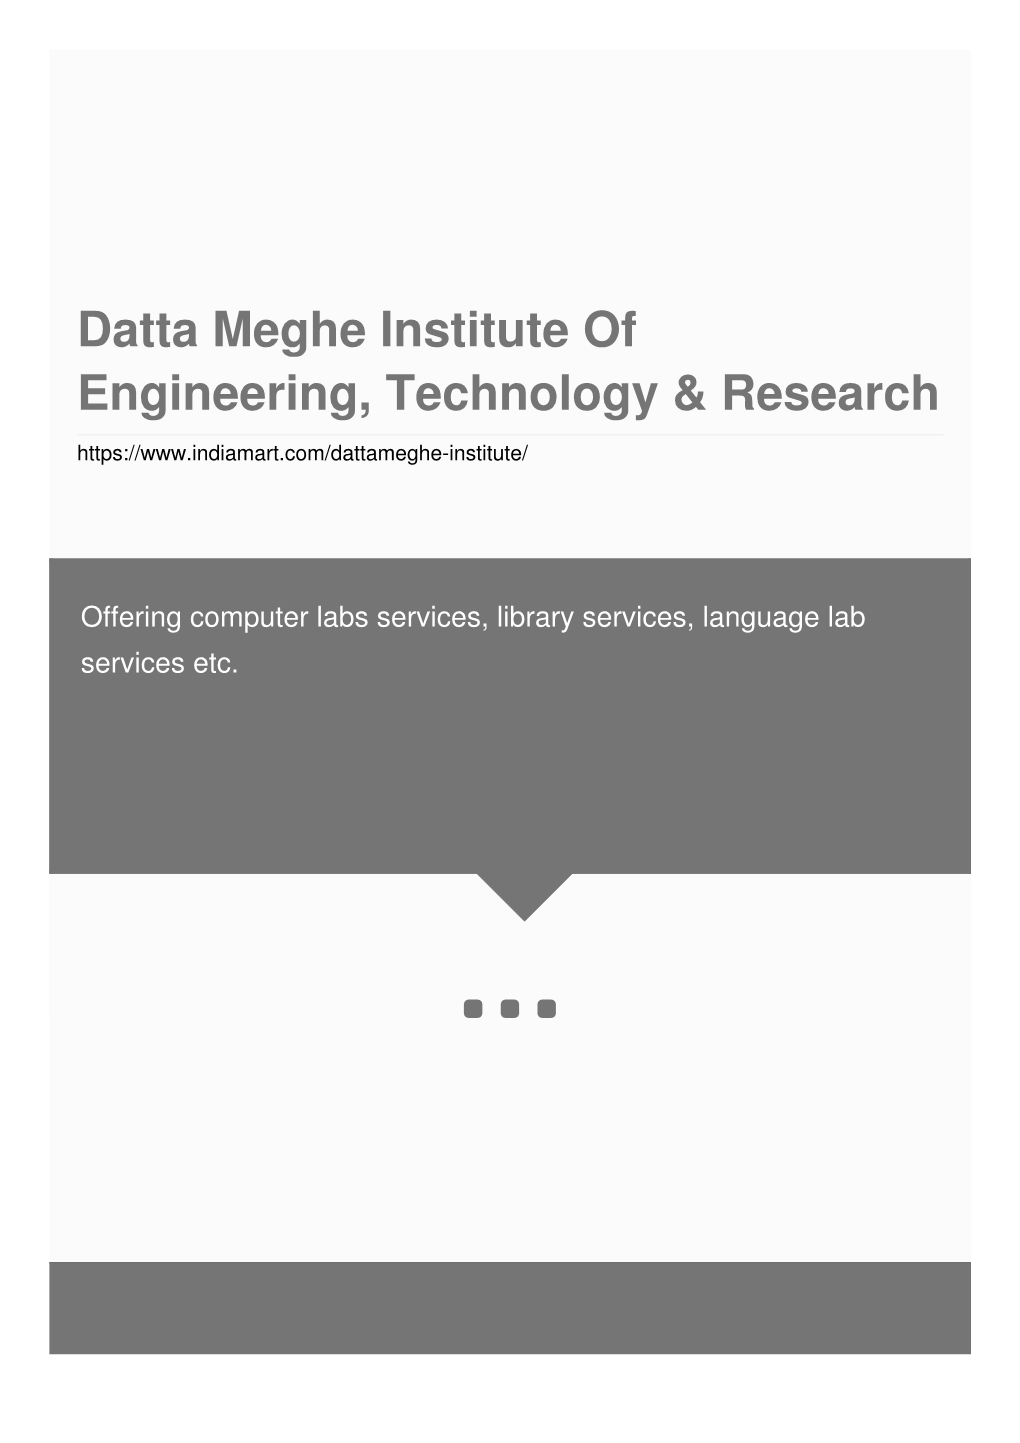 Datta Meghe Institute of Engineering, Technology & Research